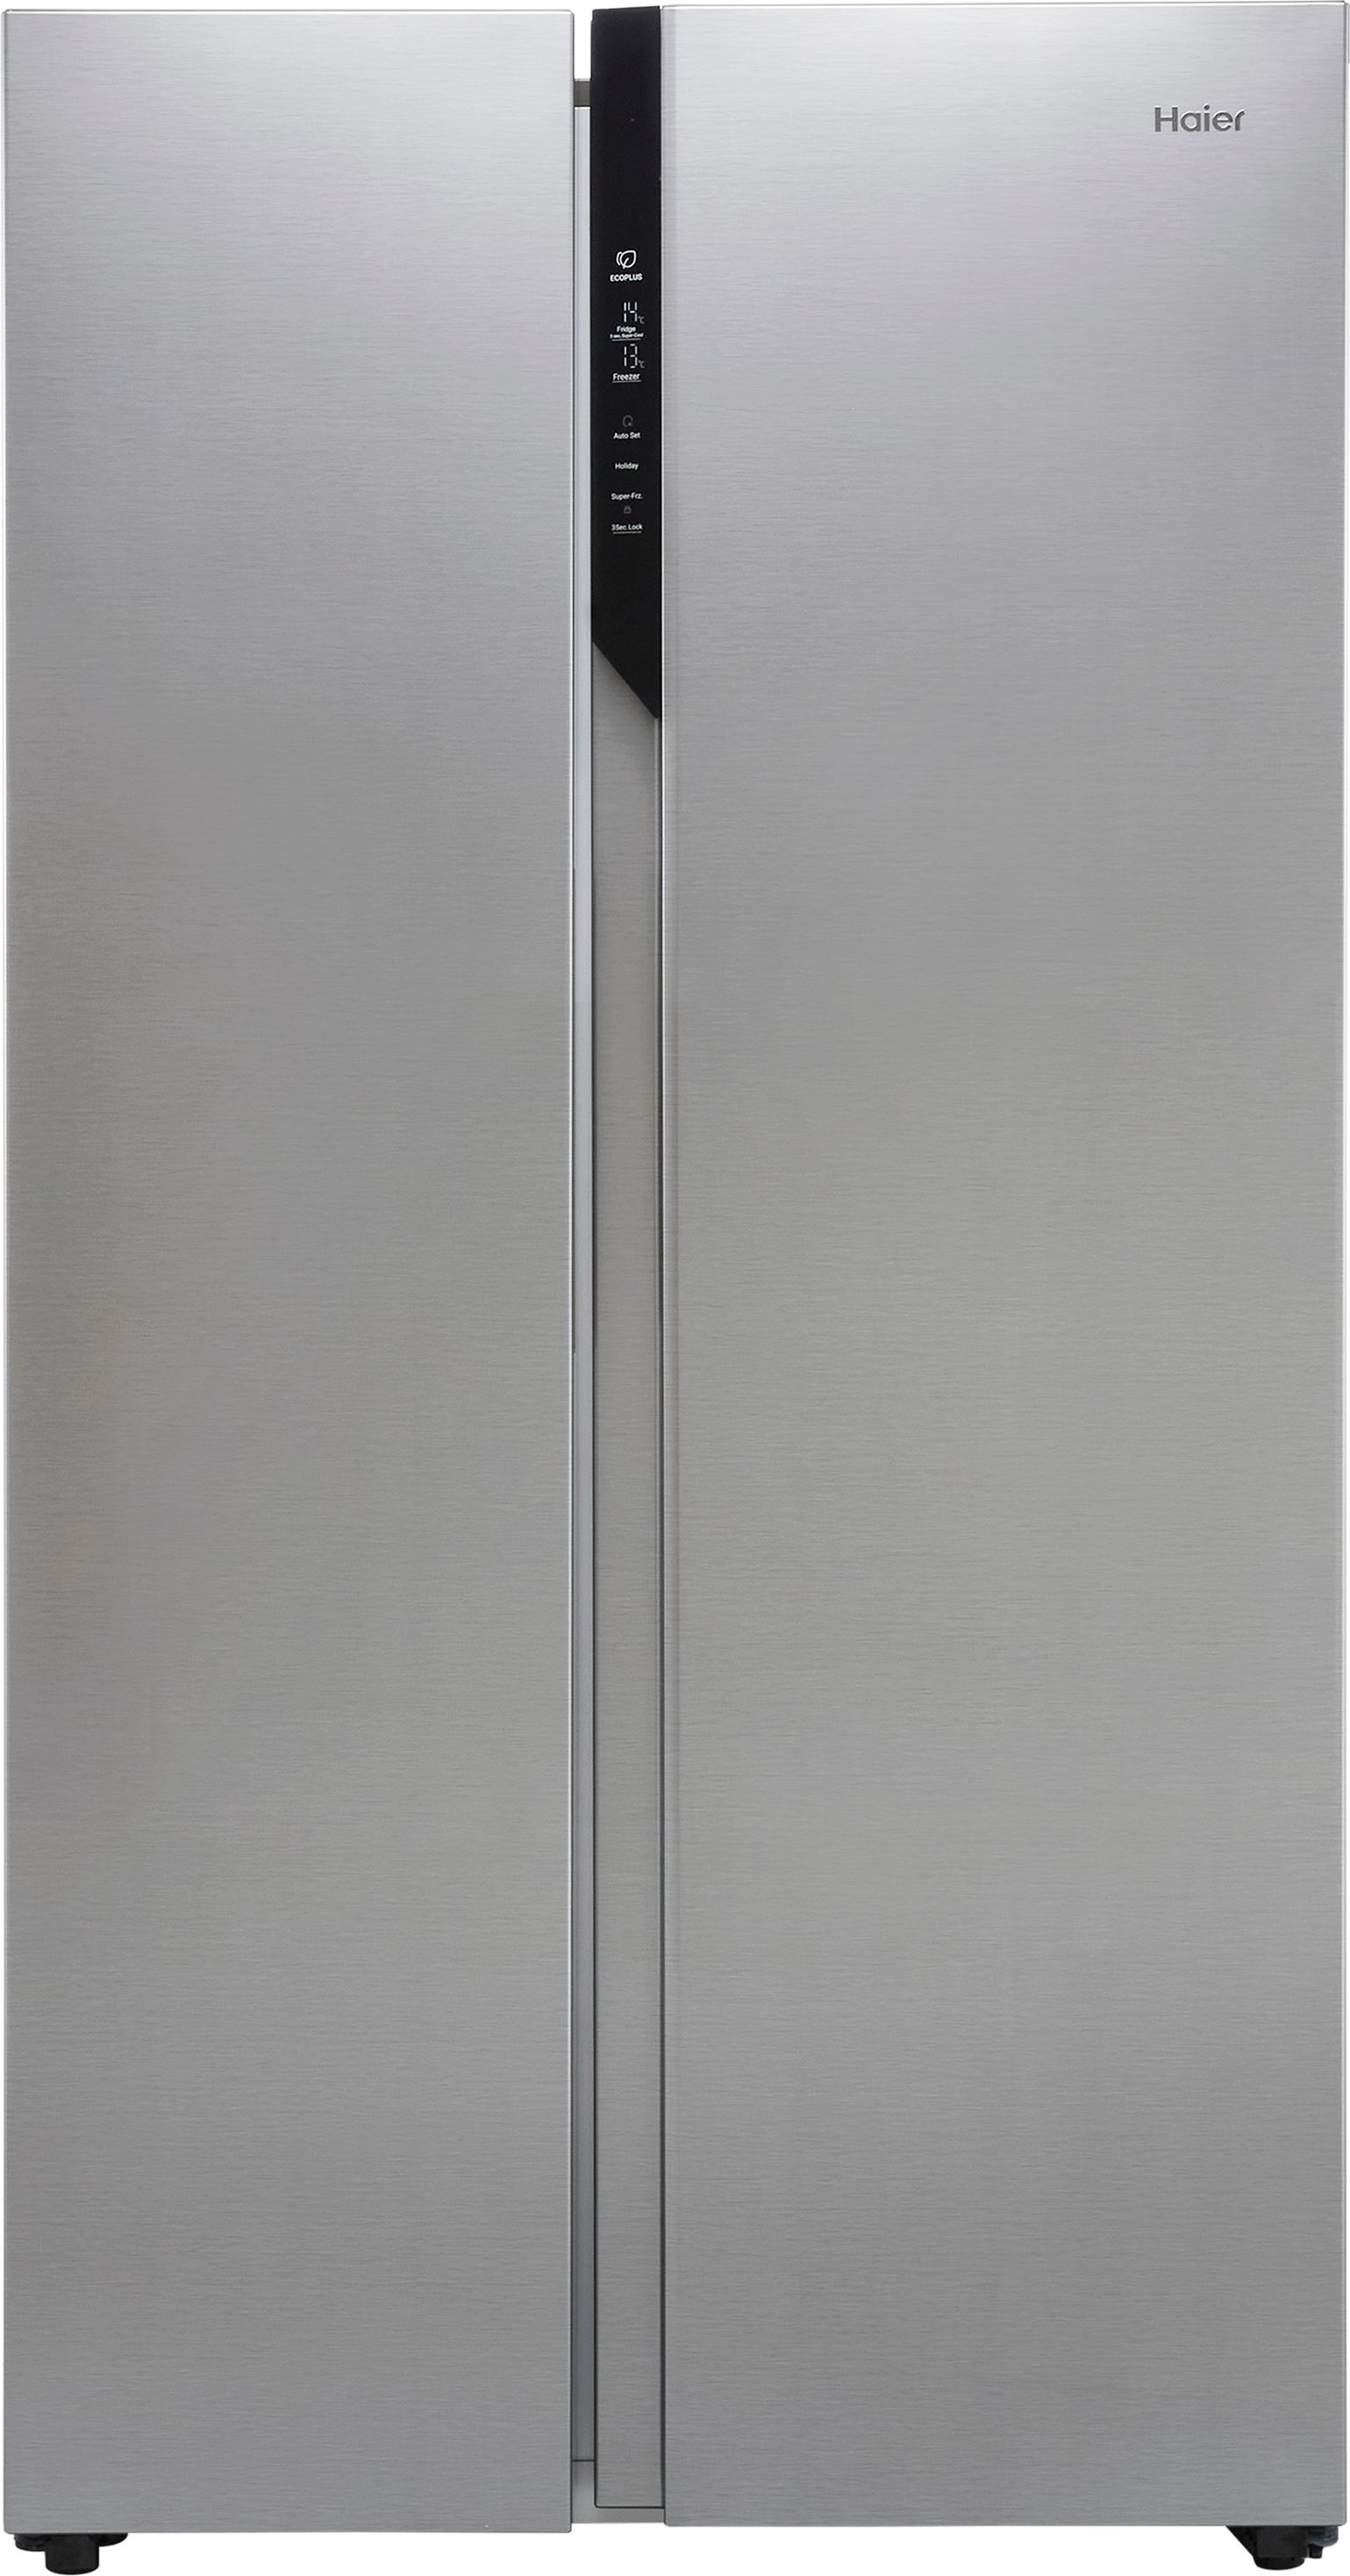 Haier HSR3918ENPG Total No Frost American Fridge Freezer - Silver - E Rated, Silver